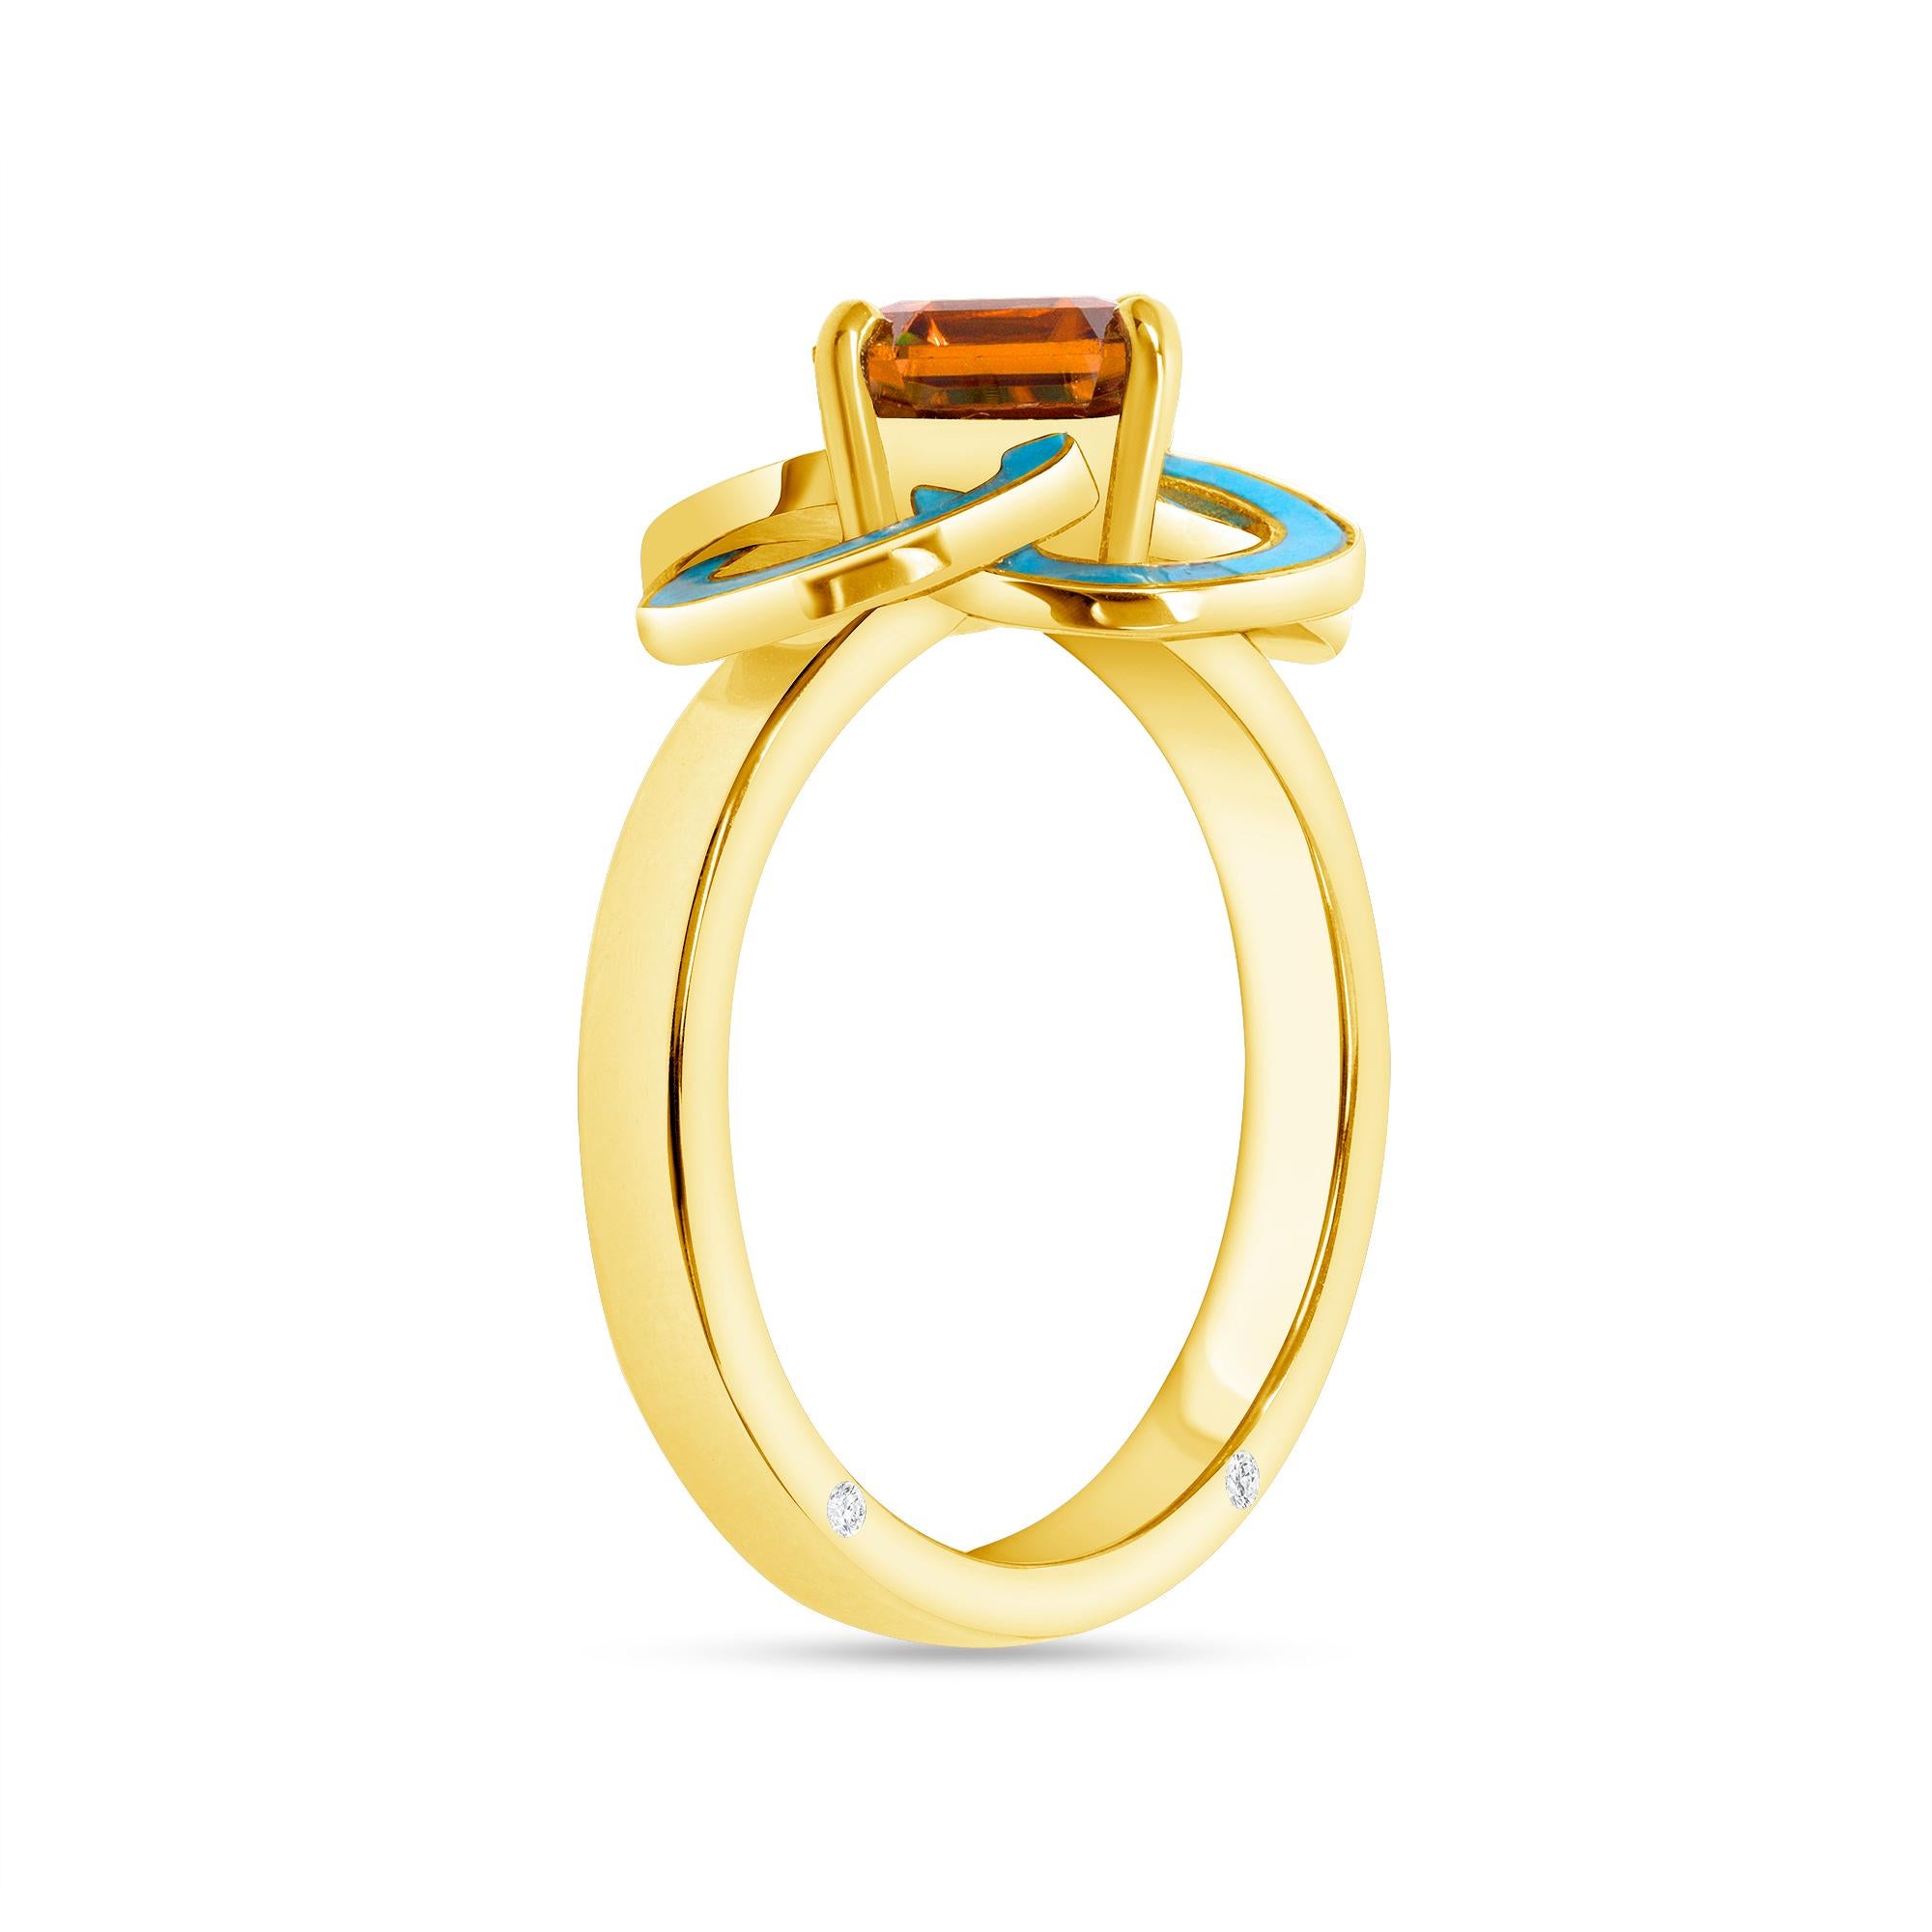 2.56 Carat Orange Zircon, Turquoise, Diamond, Yellow Gold Cocktail Ring, In Stock. This abstract ring has an 18k yellow gold band and setting. It has geometric spirals that are reminiscent of Celtic patterns. These spirals have an inlay made of